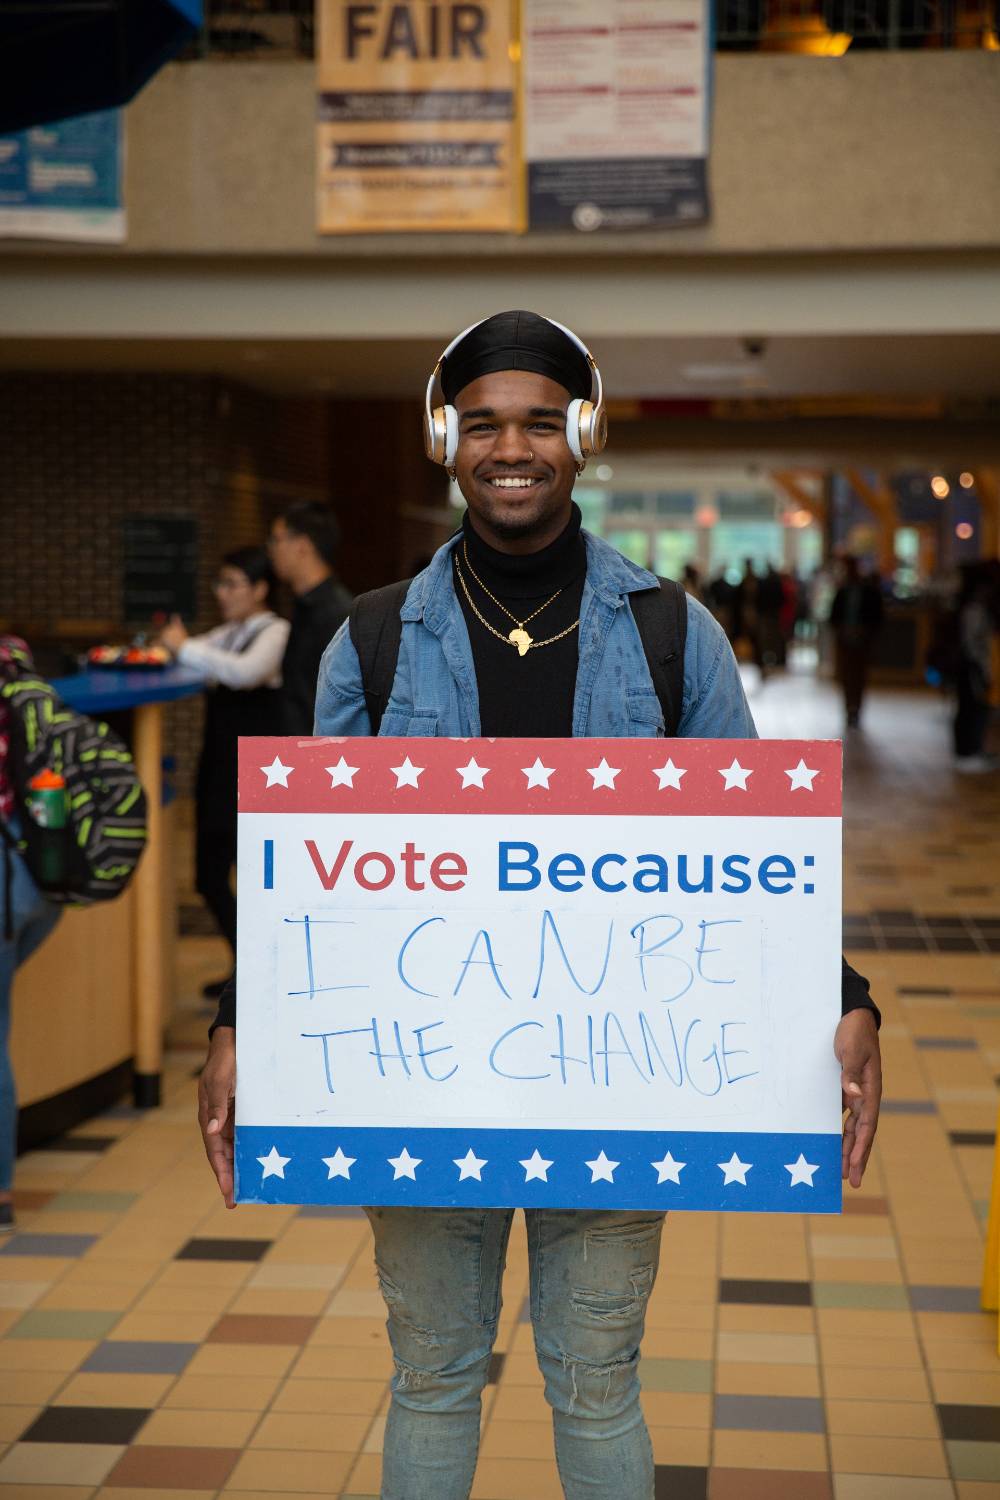 Student holding sign titled "I vote because: I can be the change"